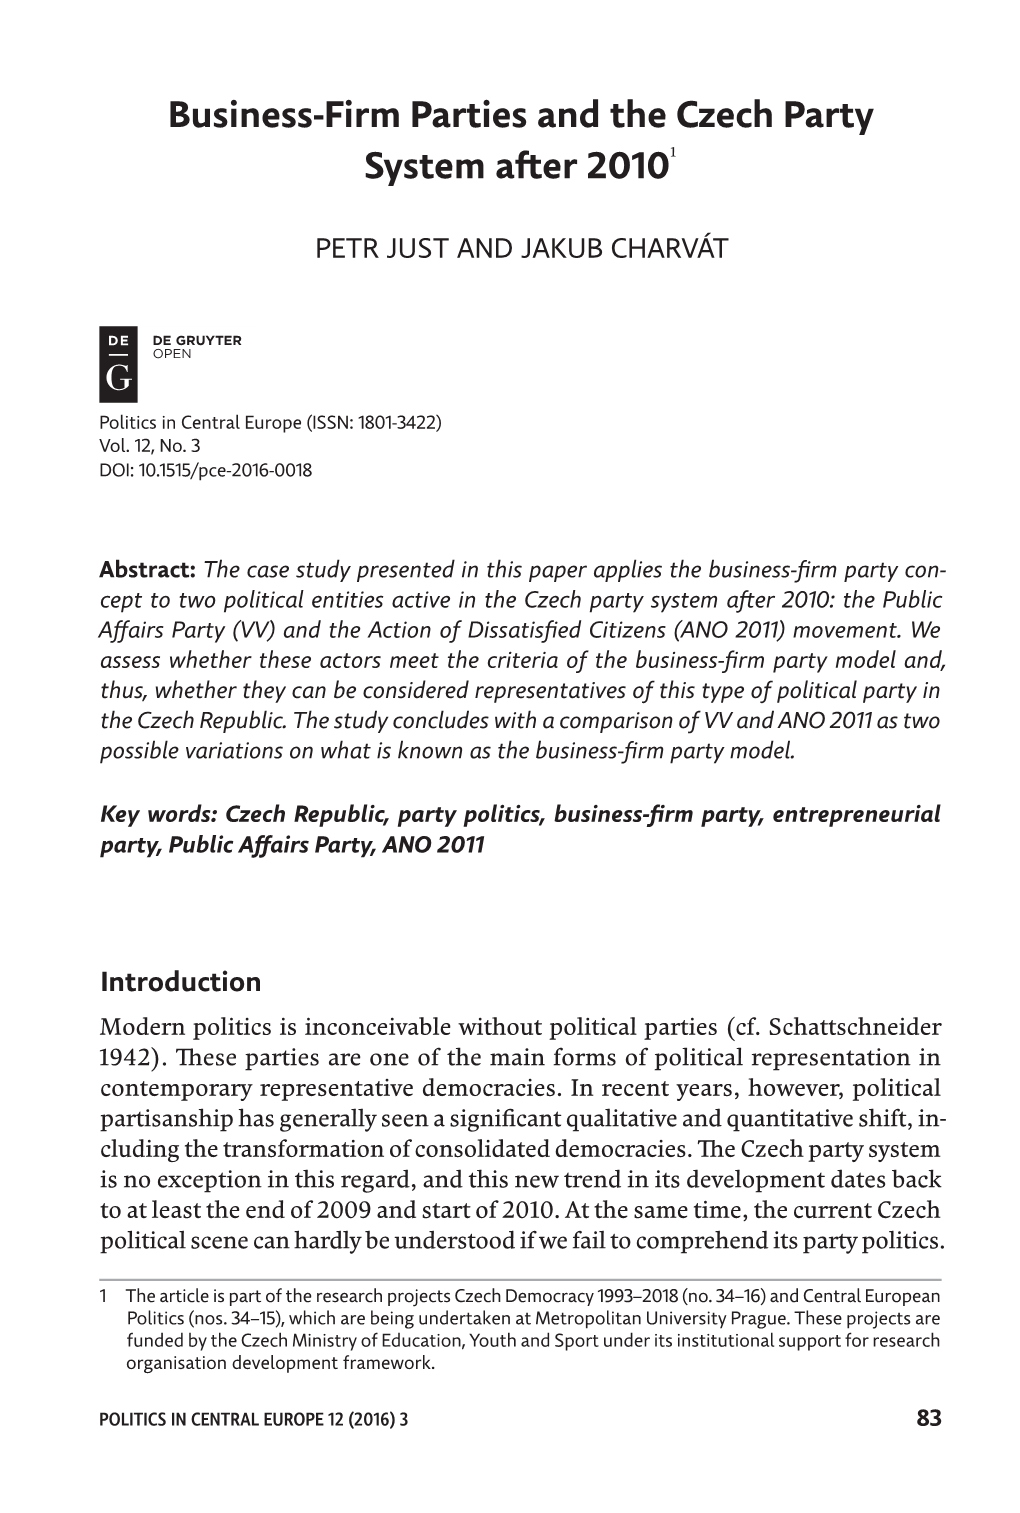 Business -Firm Parties and the Czech Party System After 20101